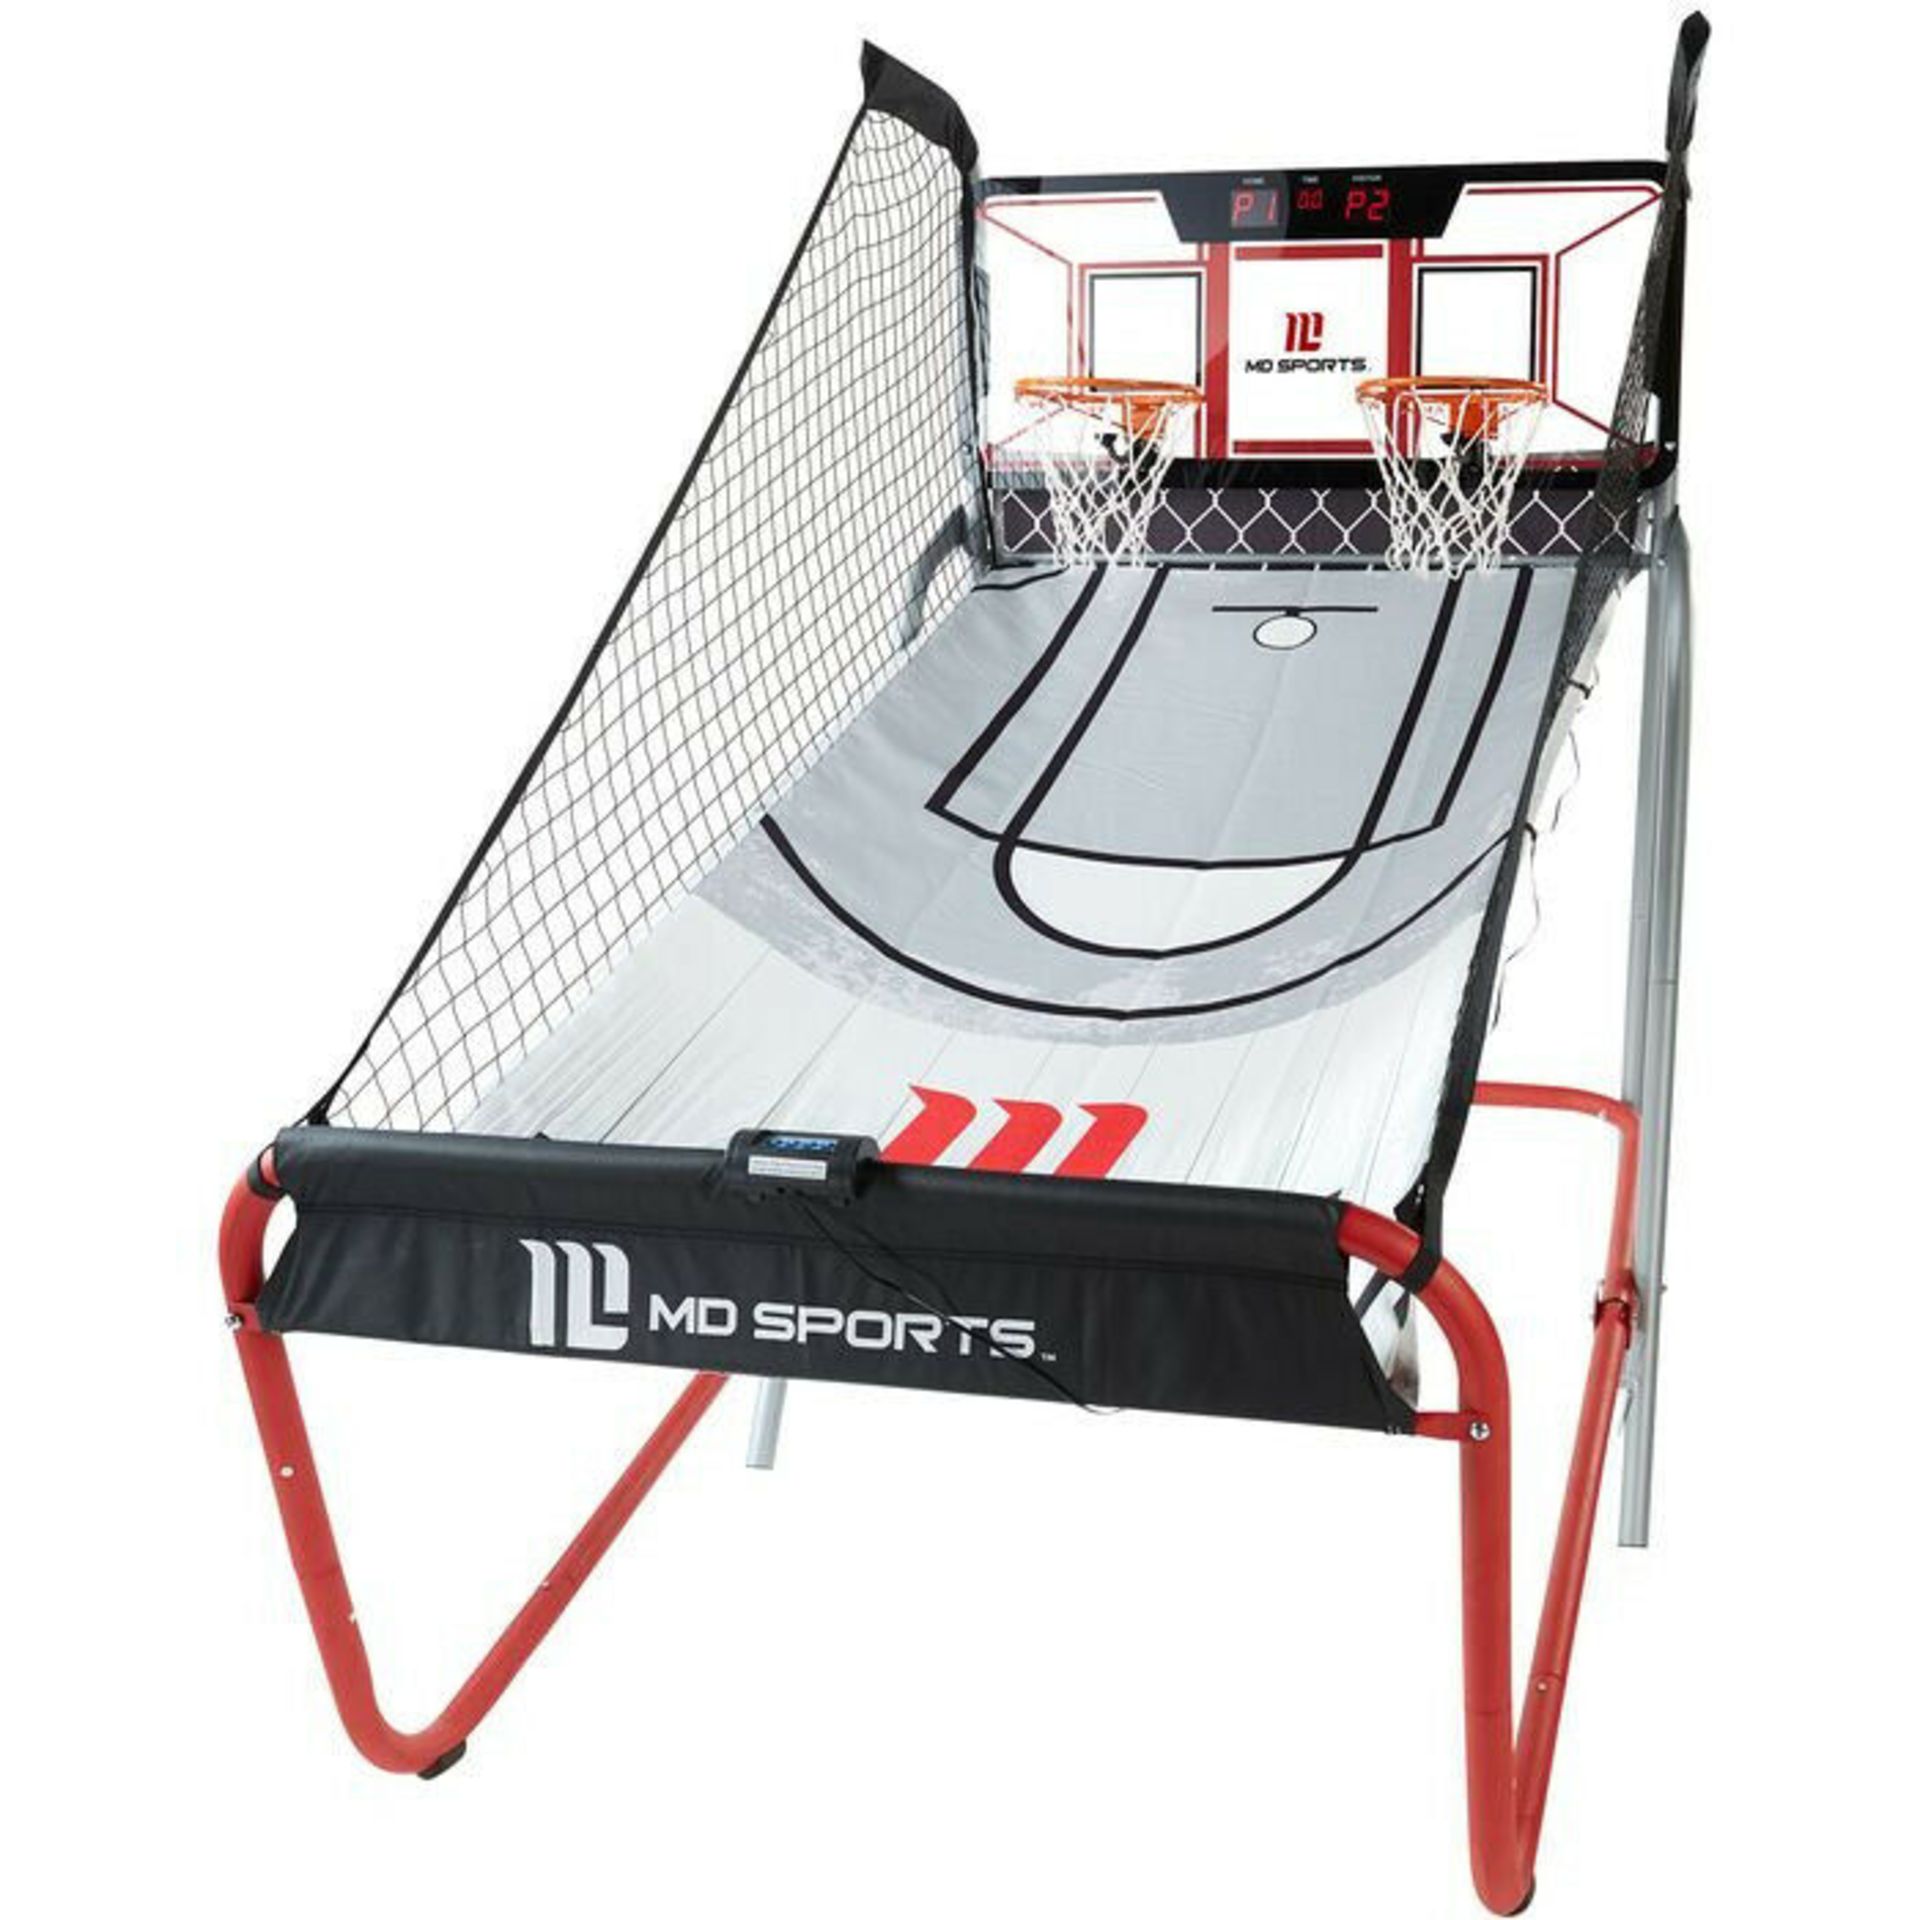 1 BOXED MD SPORTS PRO COURT 7FT 2 PLAYER BASKETBALL GAME RRP Â£179.99 (GENERIC IMAGE GUIDE)